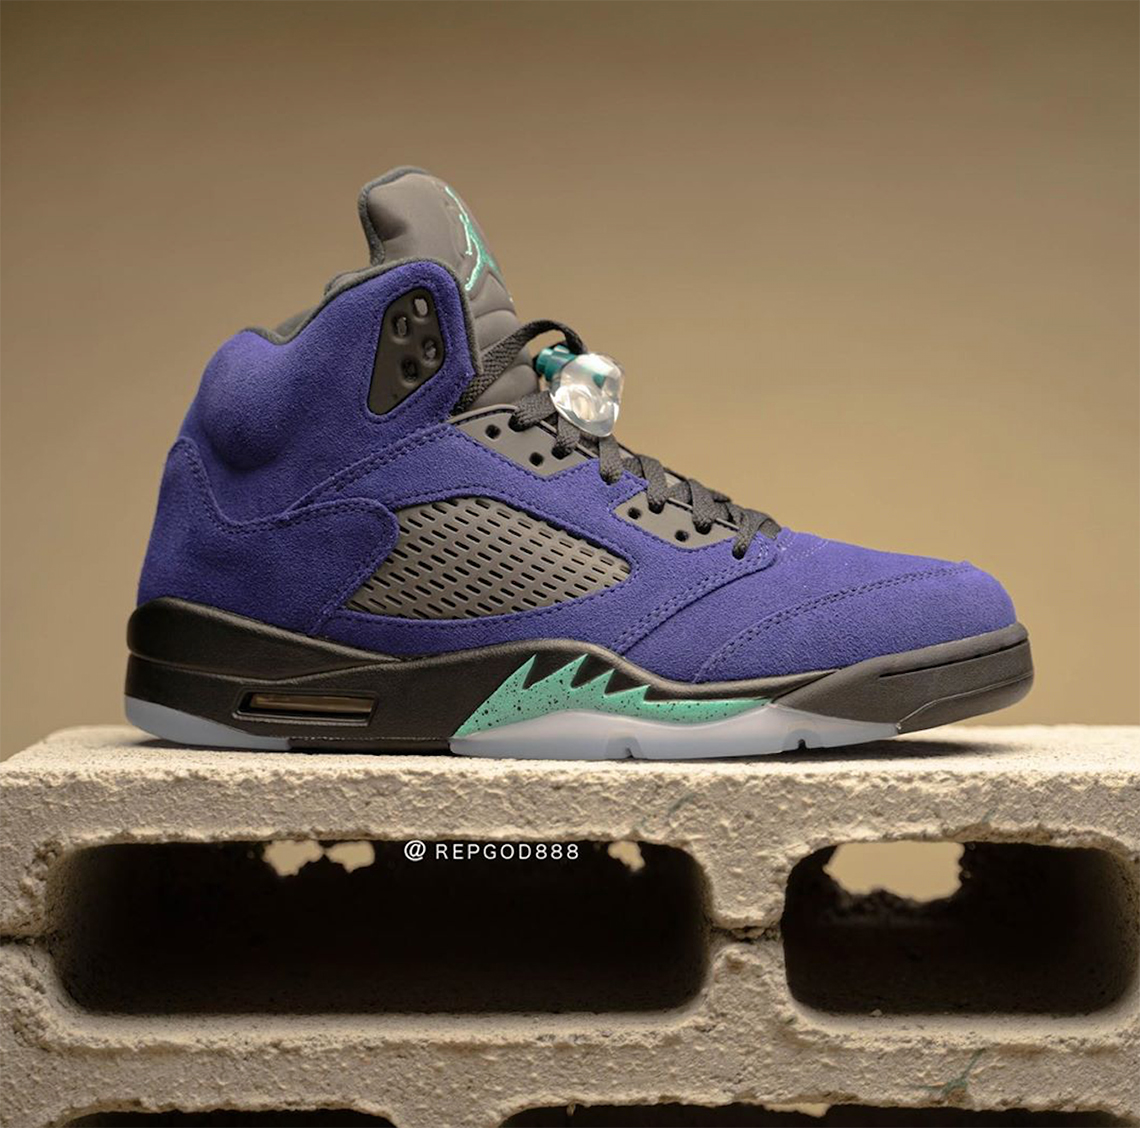 when did the jordan 5 grapes come out